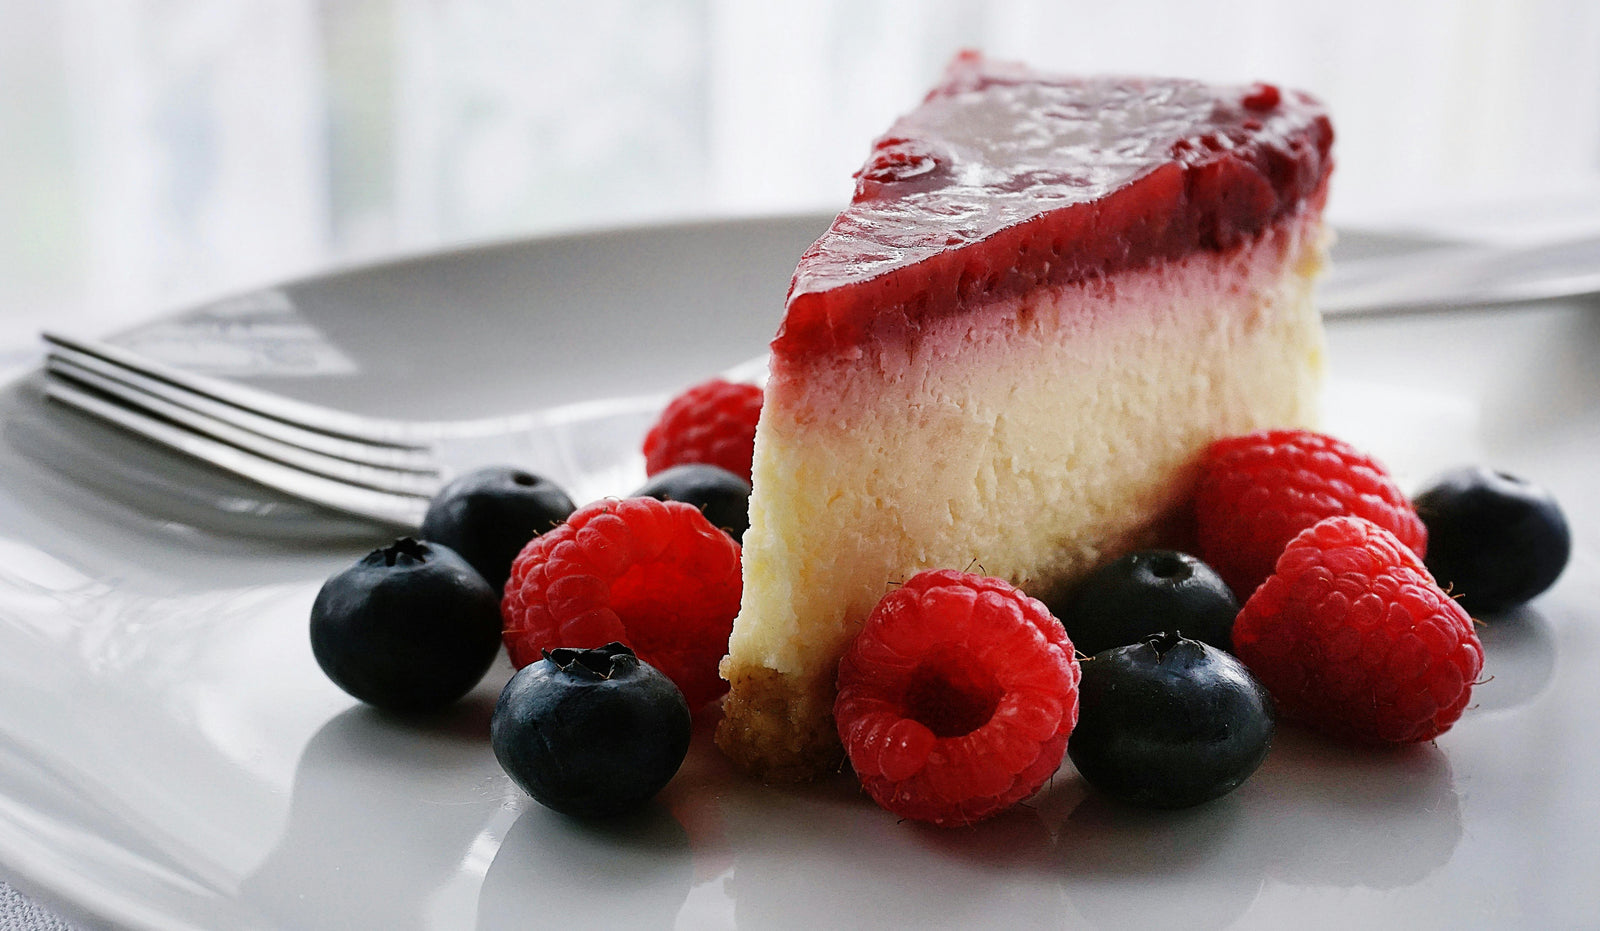 Best Cheesecake Substitute for Cooking & Baking - Alternative Cheesecake Flavors